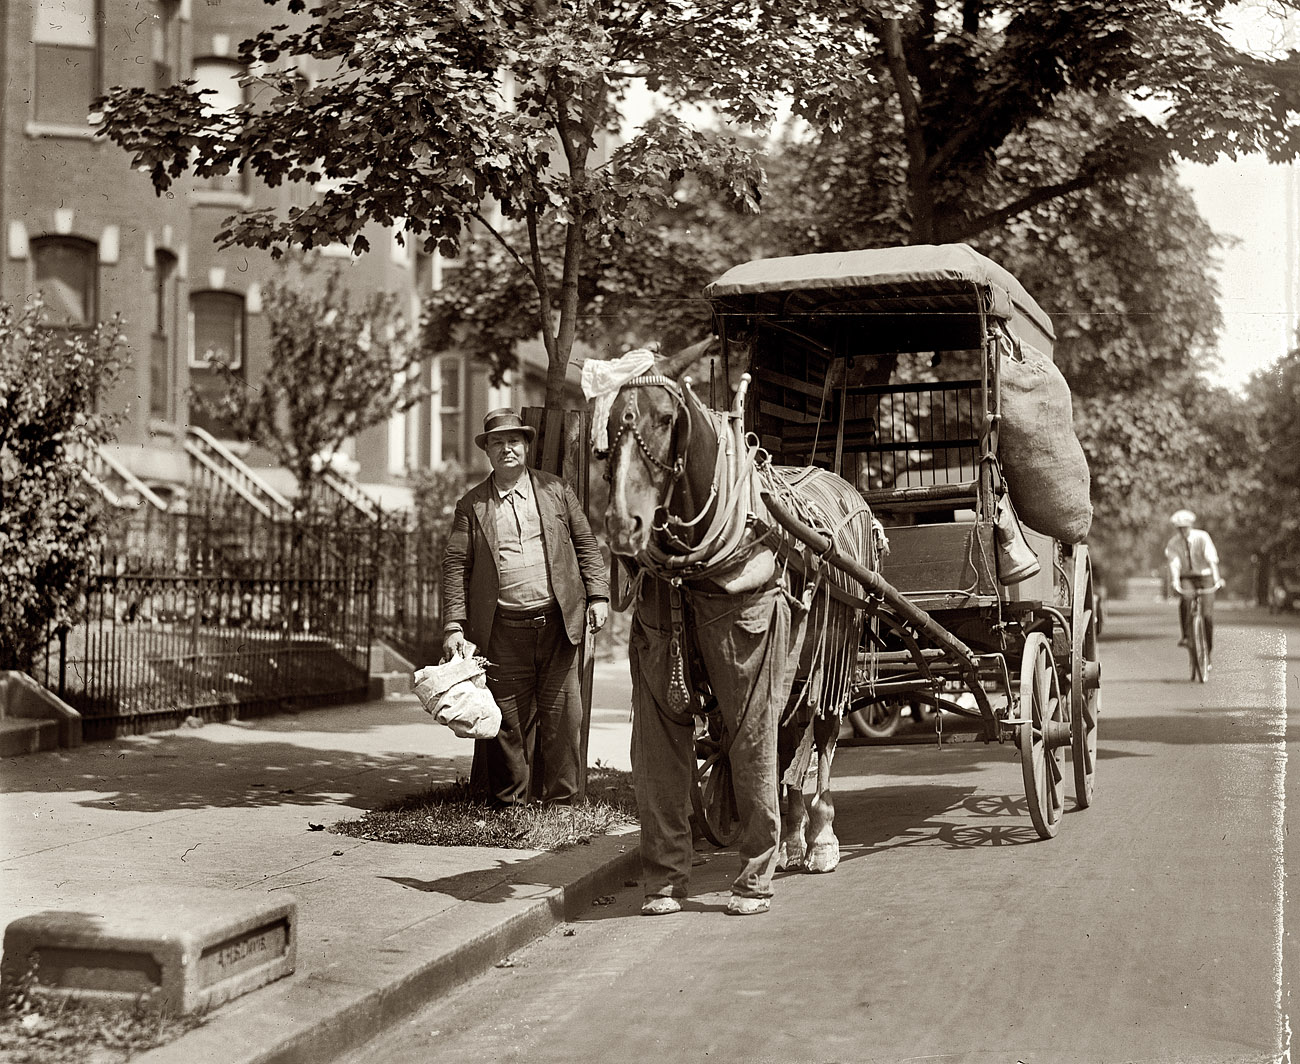 July 1923. A wagon horse outfitted against summer insect pests on the streets of Washington, D.C. View full size. National Photo Company Collection.